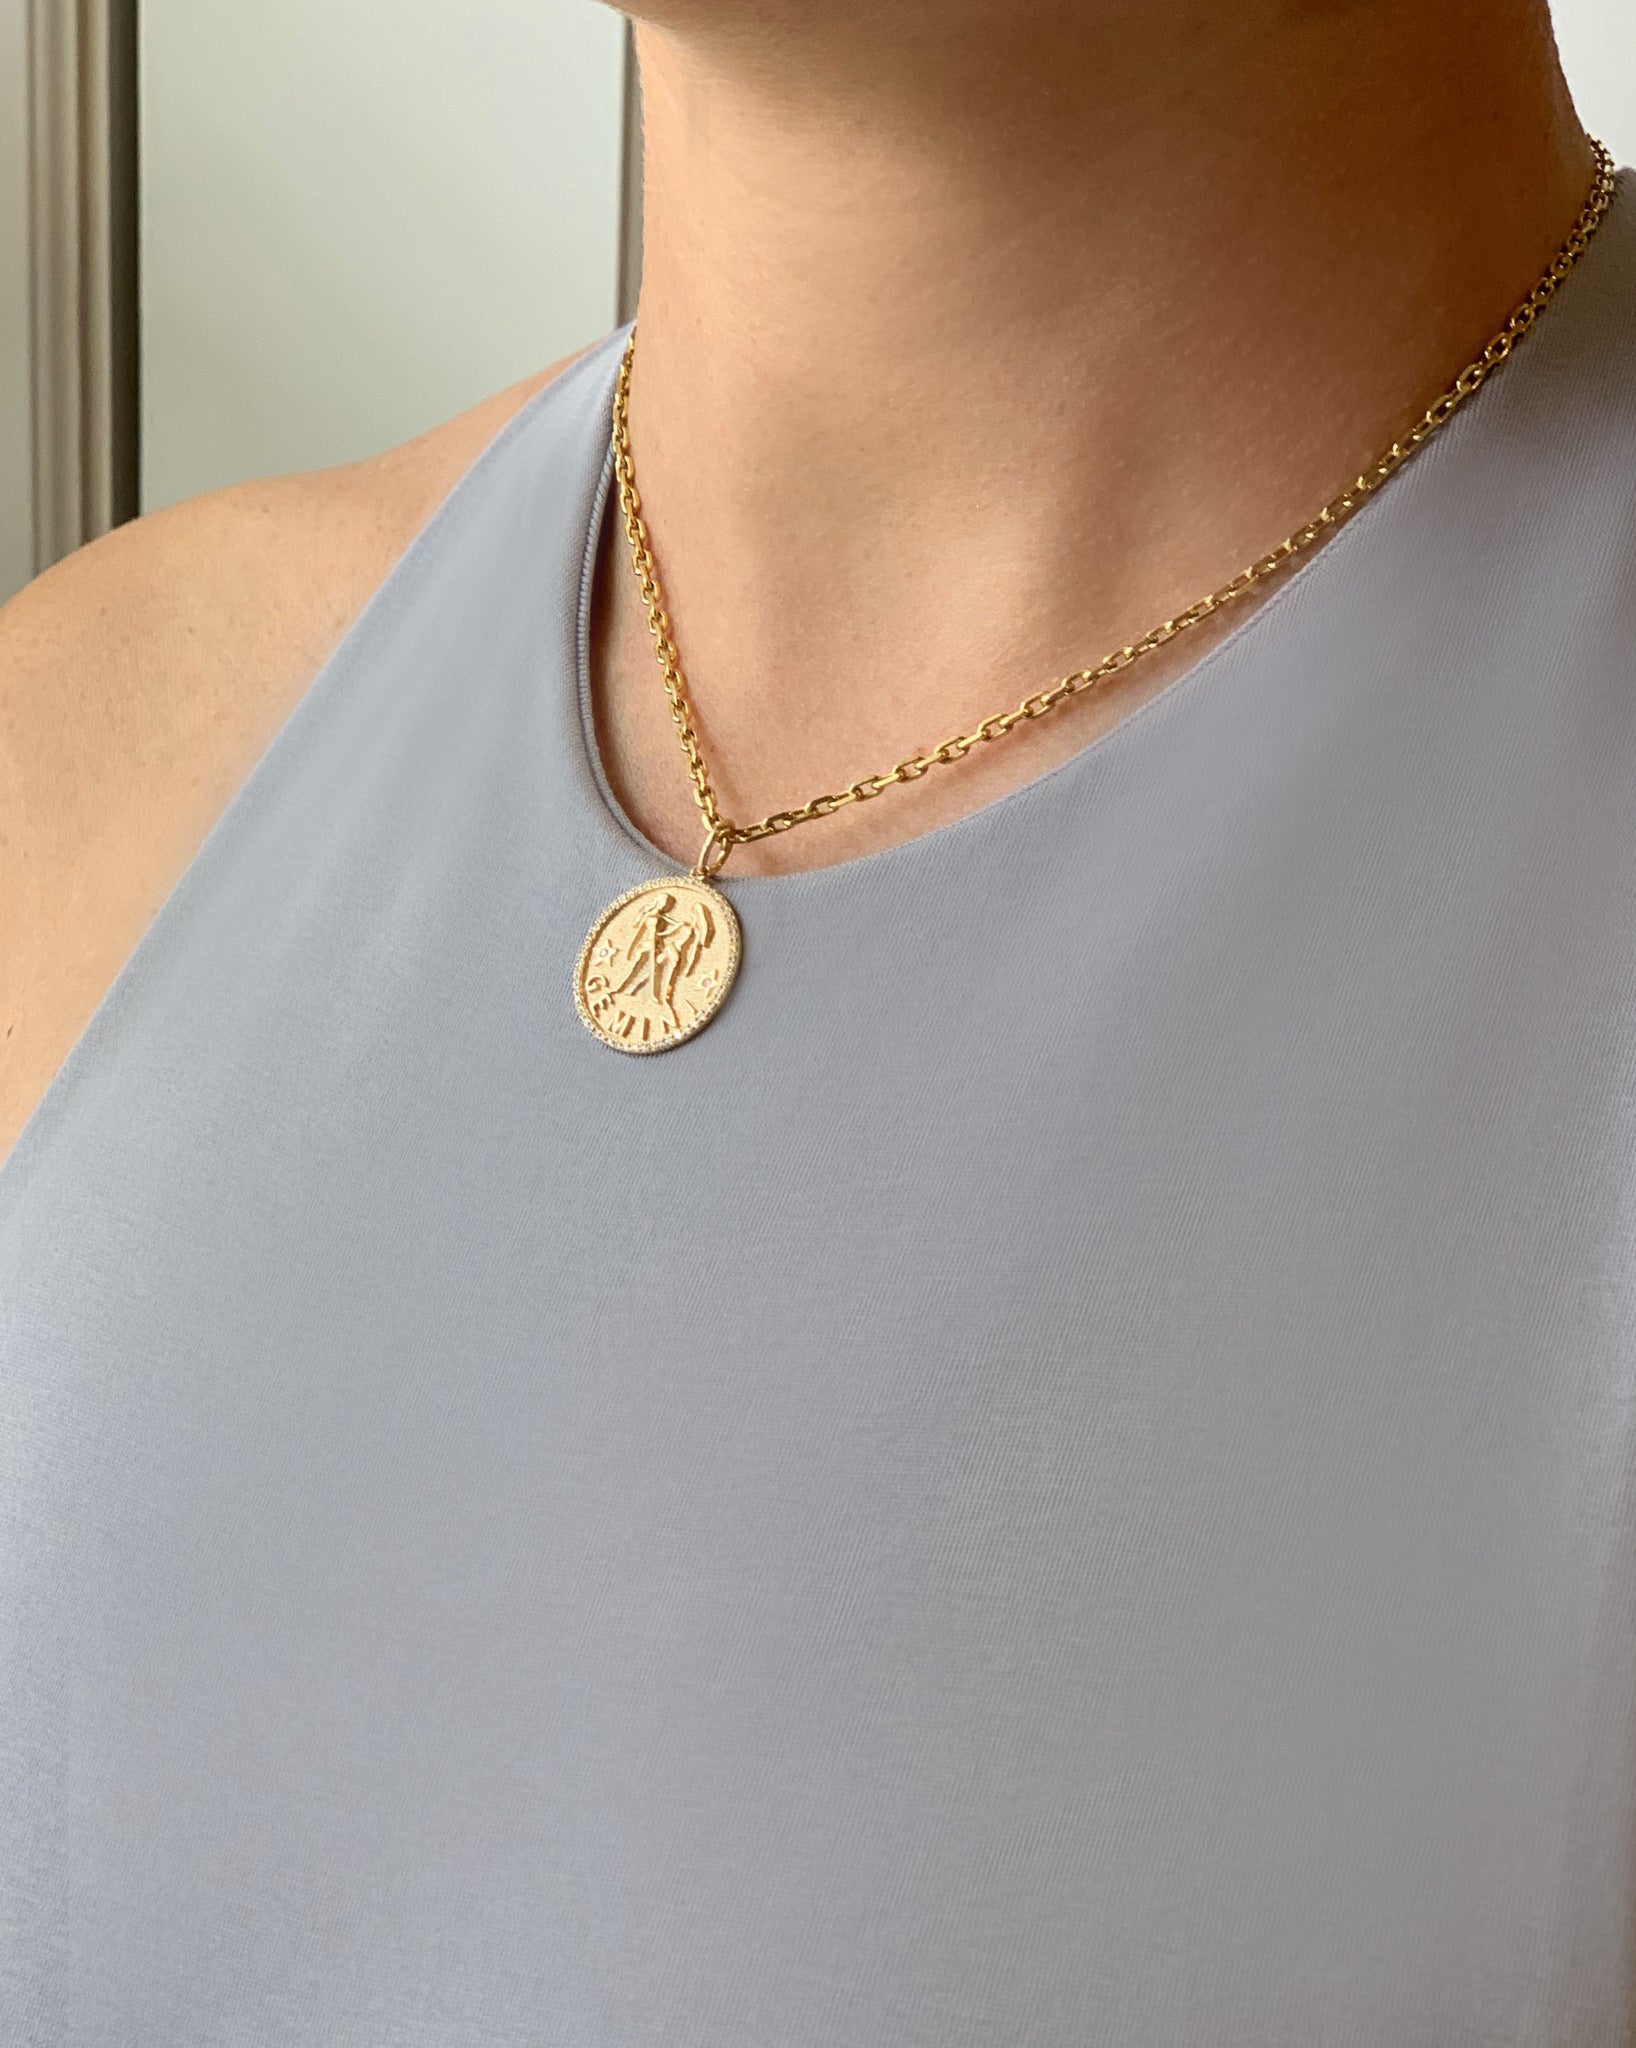 gold chain with zodiac sign pendant